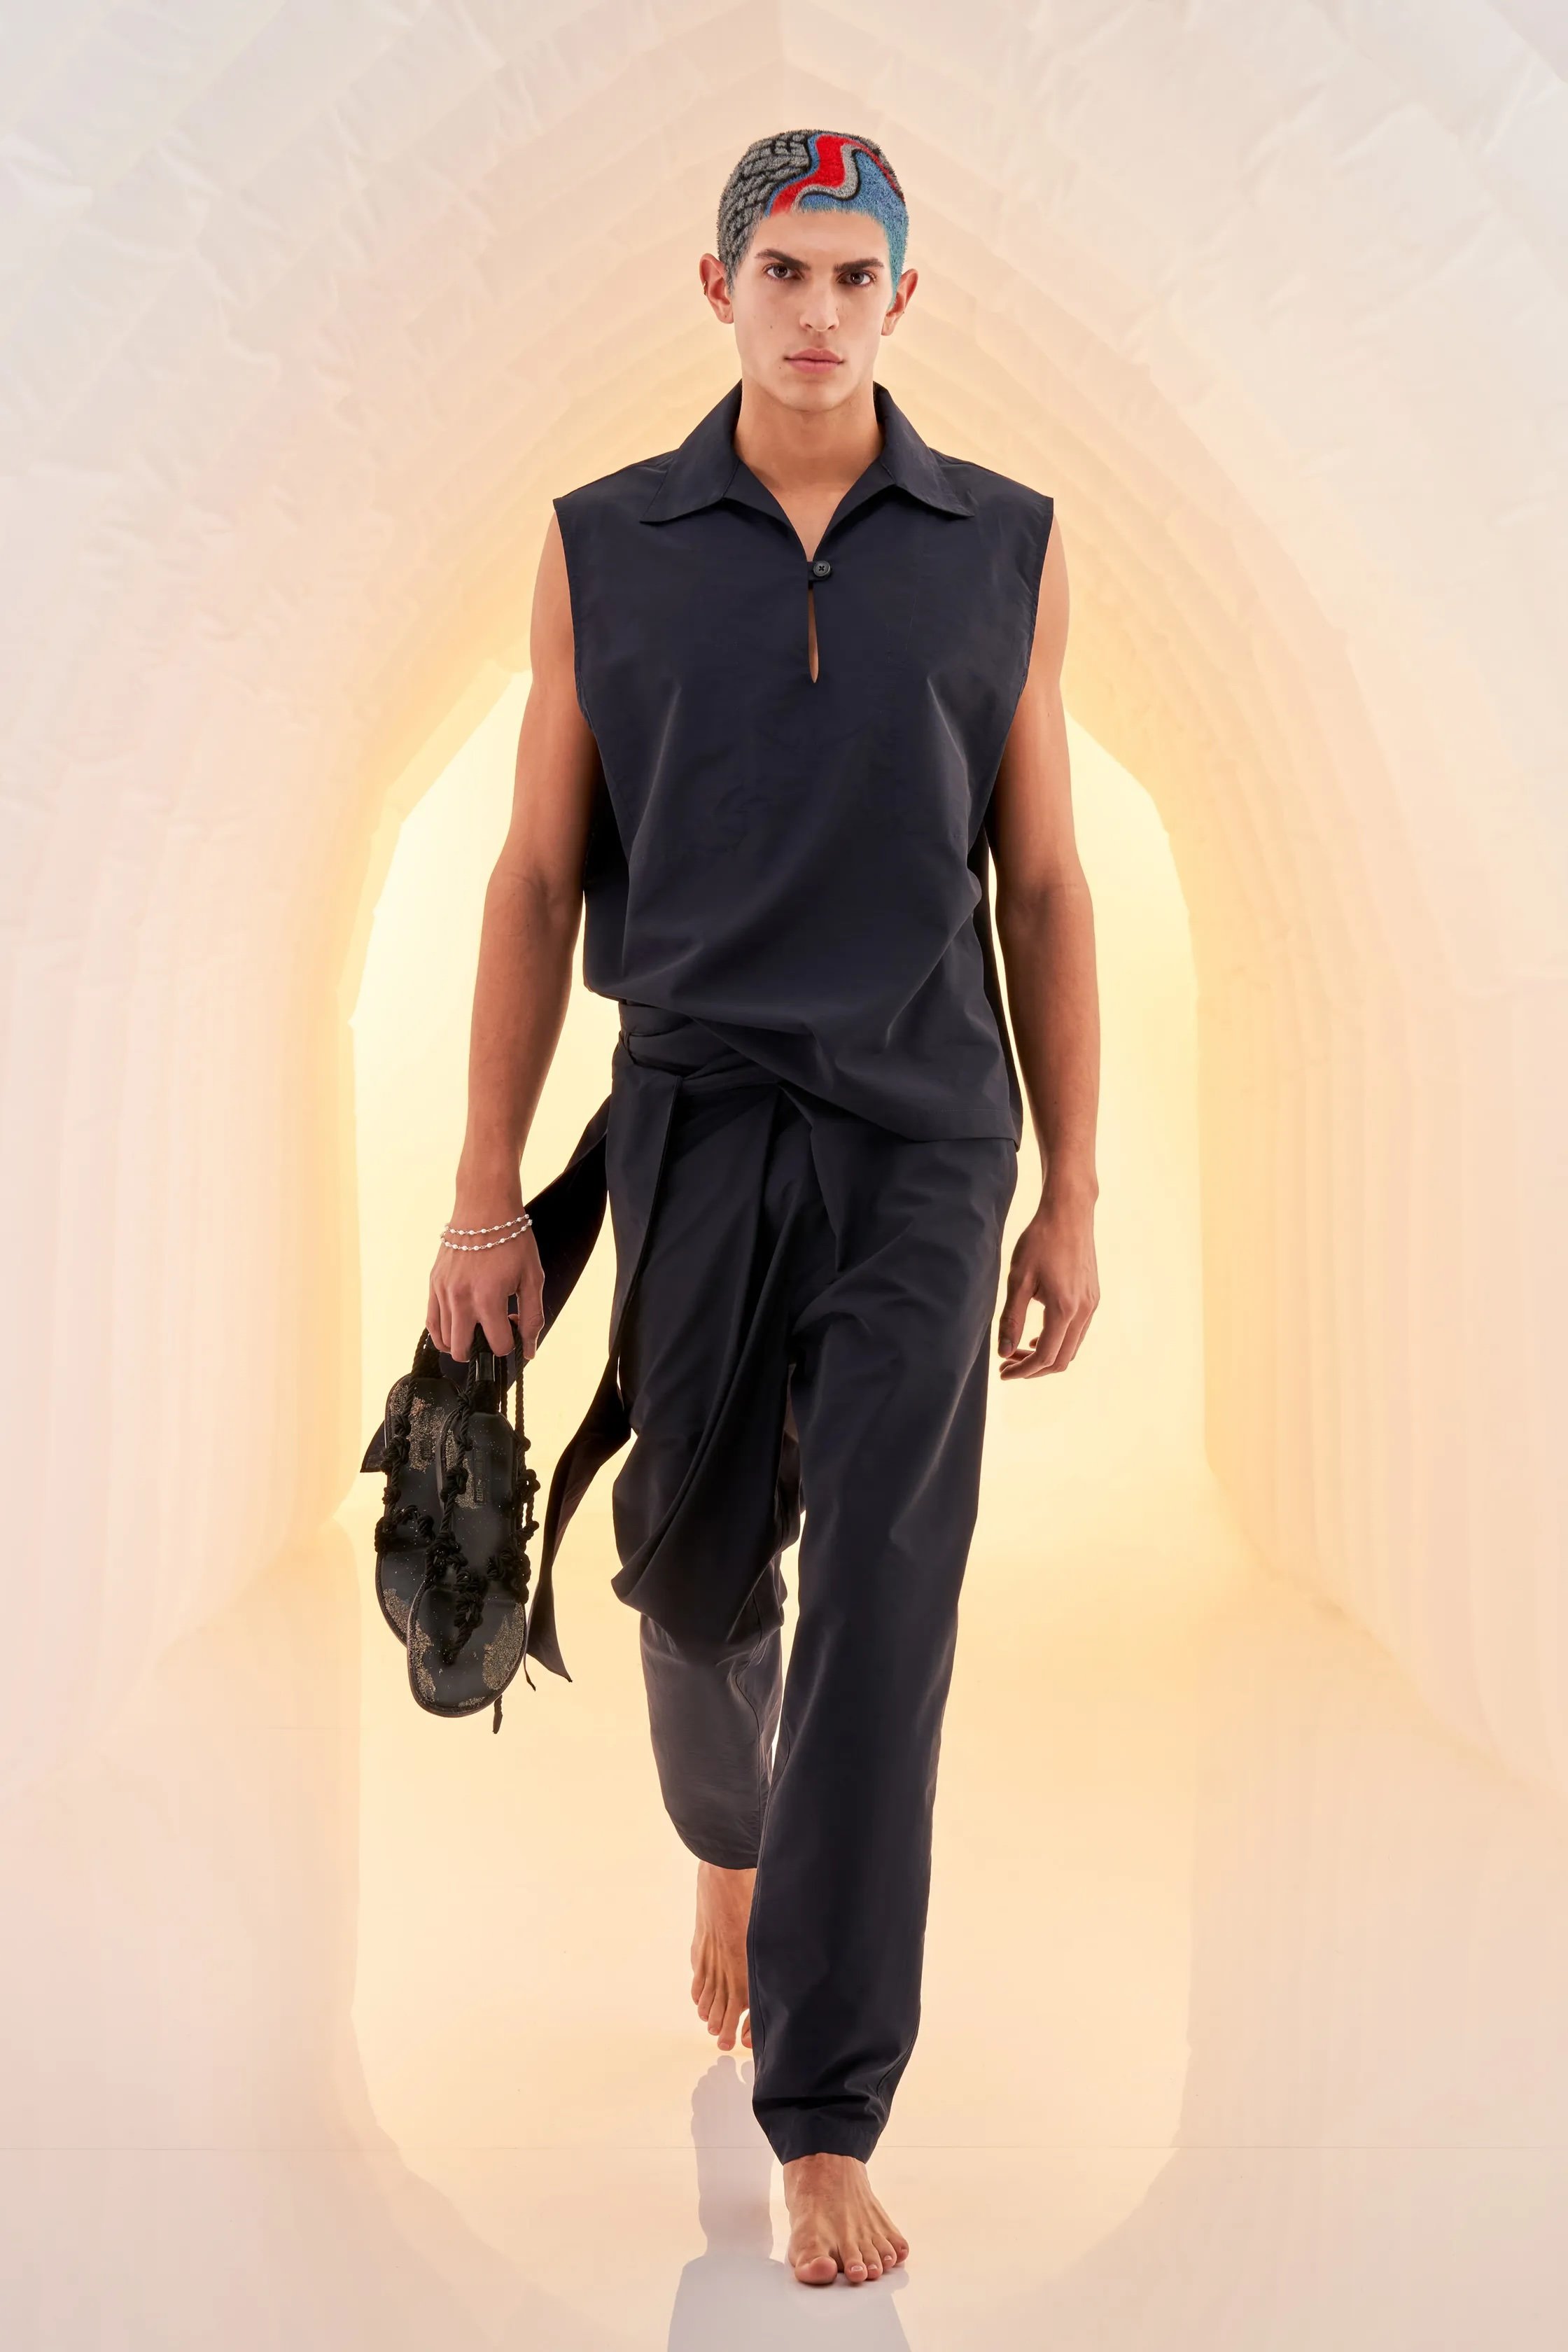 00022-willie-norris-for-outlier-spring-2024-ready-to-wear-credit-brand.jpeg